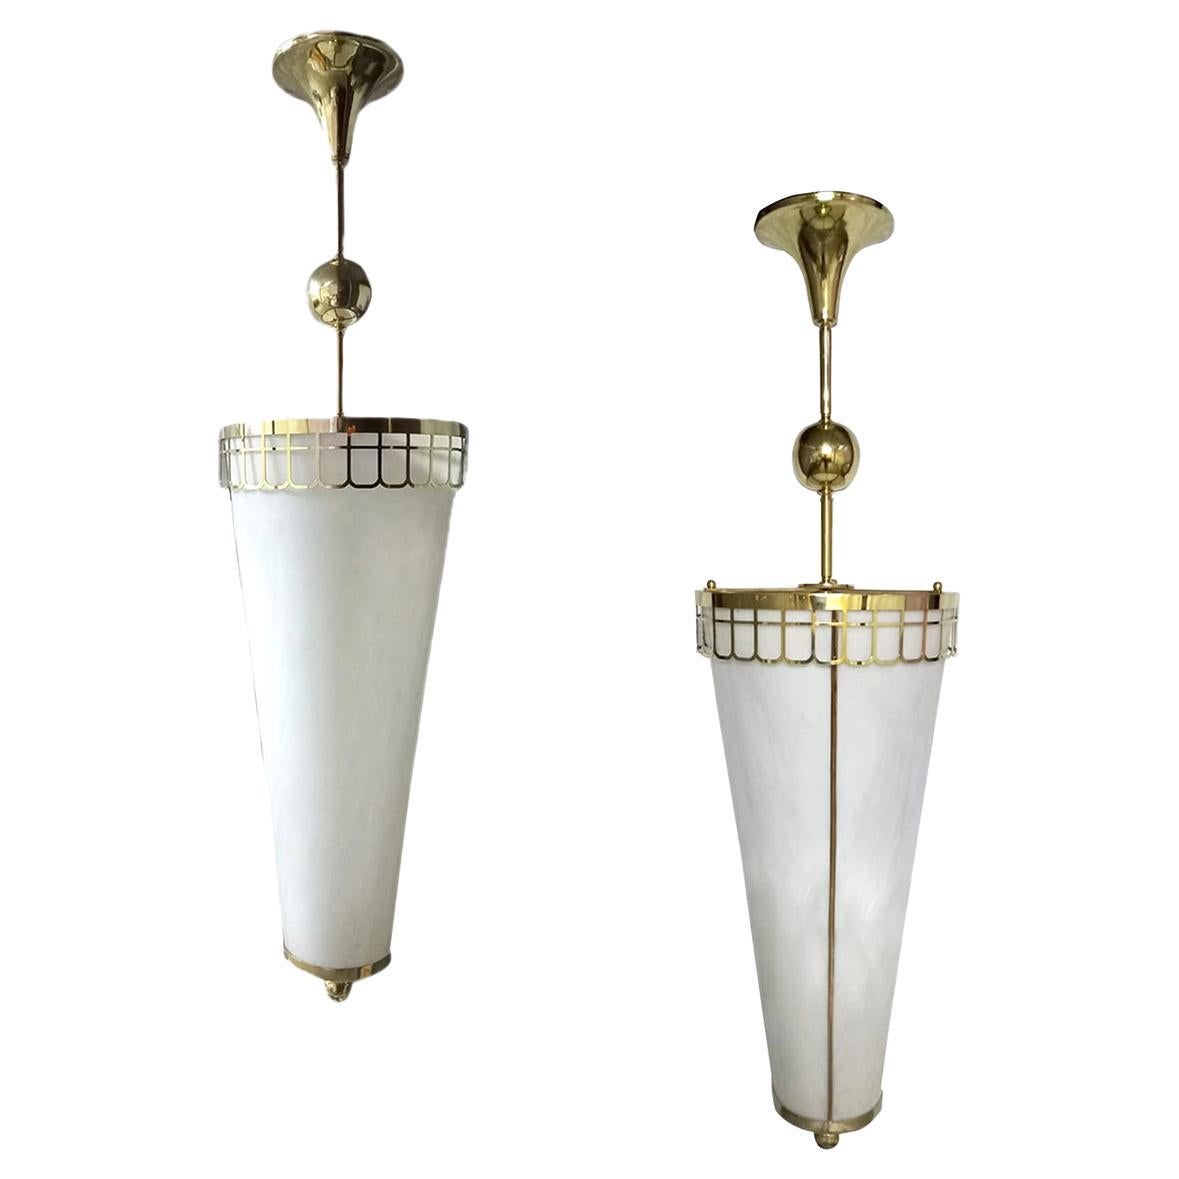 A set of six French circa 1950's milk glass pendant light fixtures with bronze body and fittings. Sold individually.

Measurements:
Height of body: 32